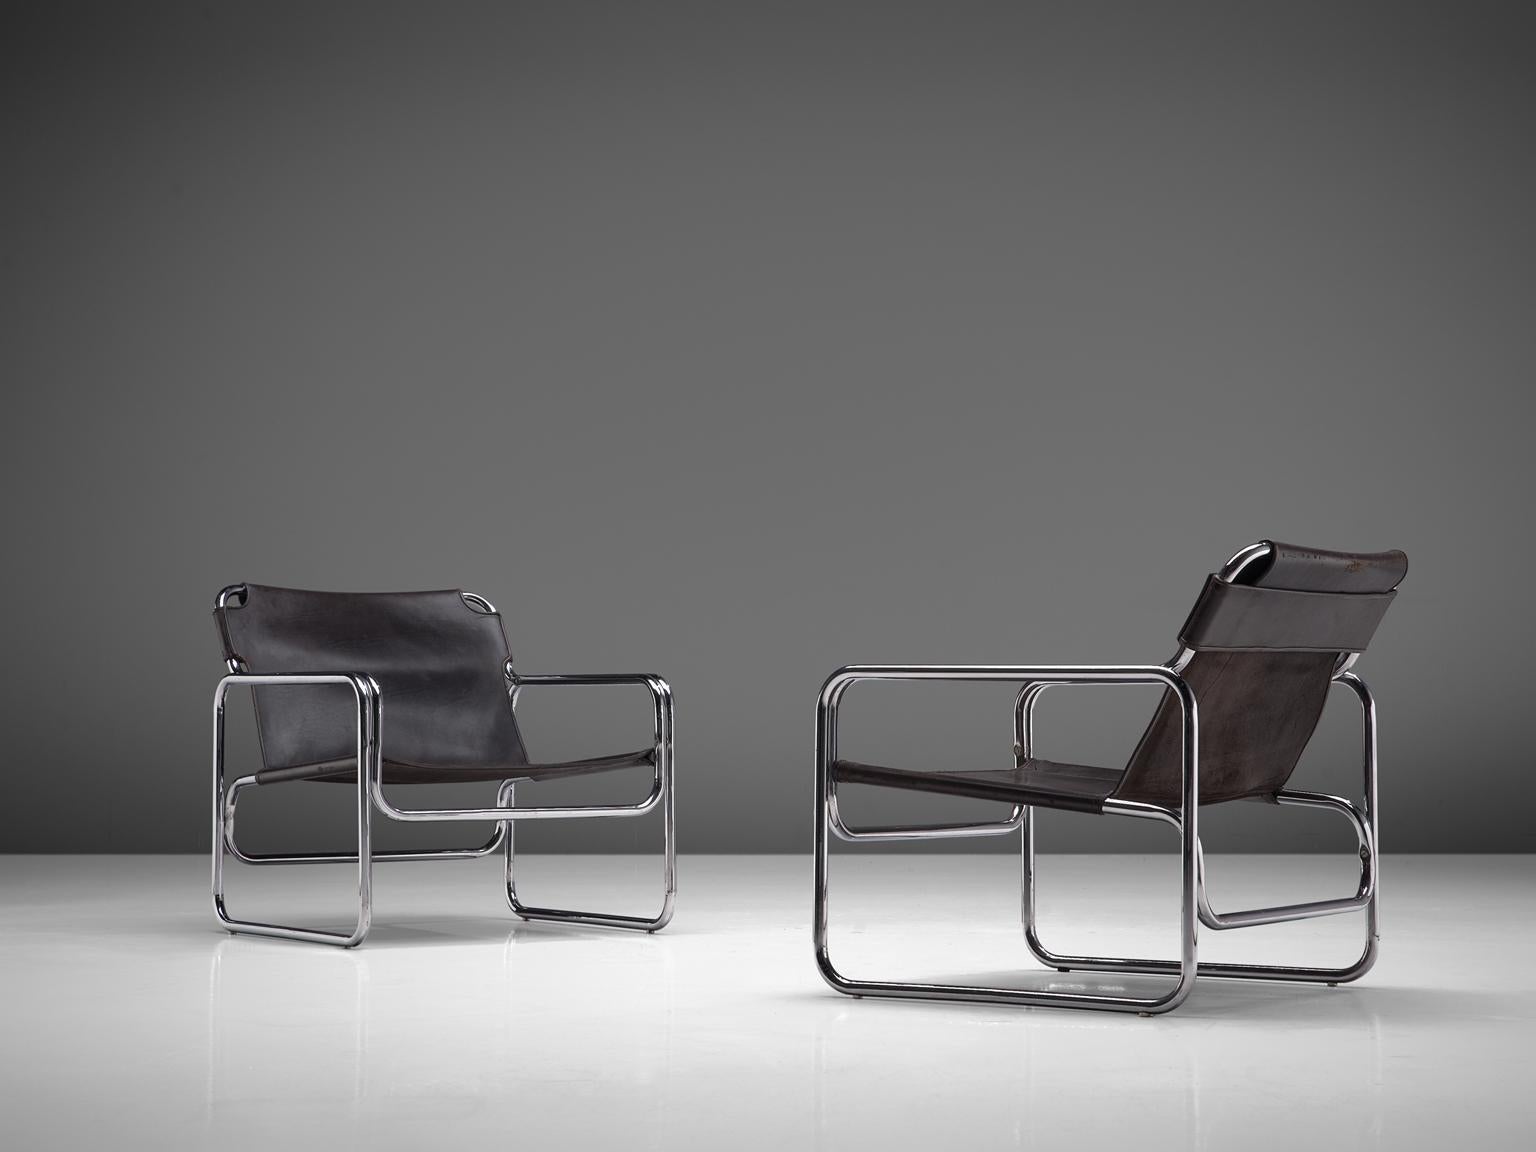 Pair of armchairs, metal and leather, the Netherlands, 1960s.

These tubular chairs are a great example of the radical Bauhaus aesthetic. Functional and light thanks to the combination of strong, lasting materials; bended tubular steel with dark